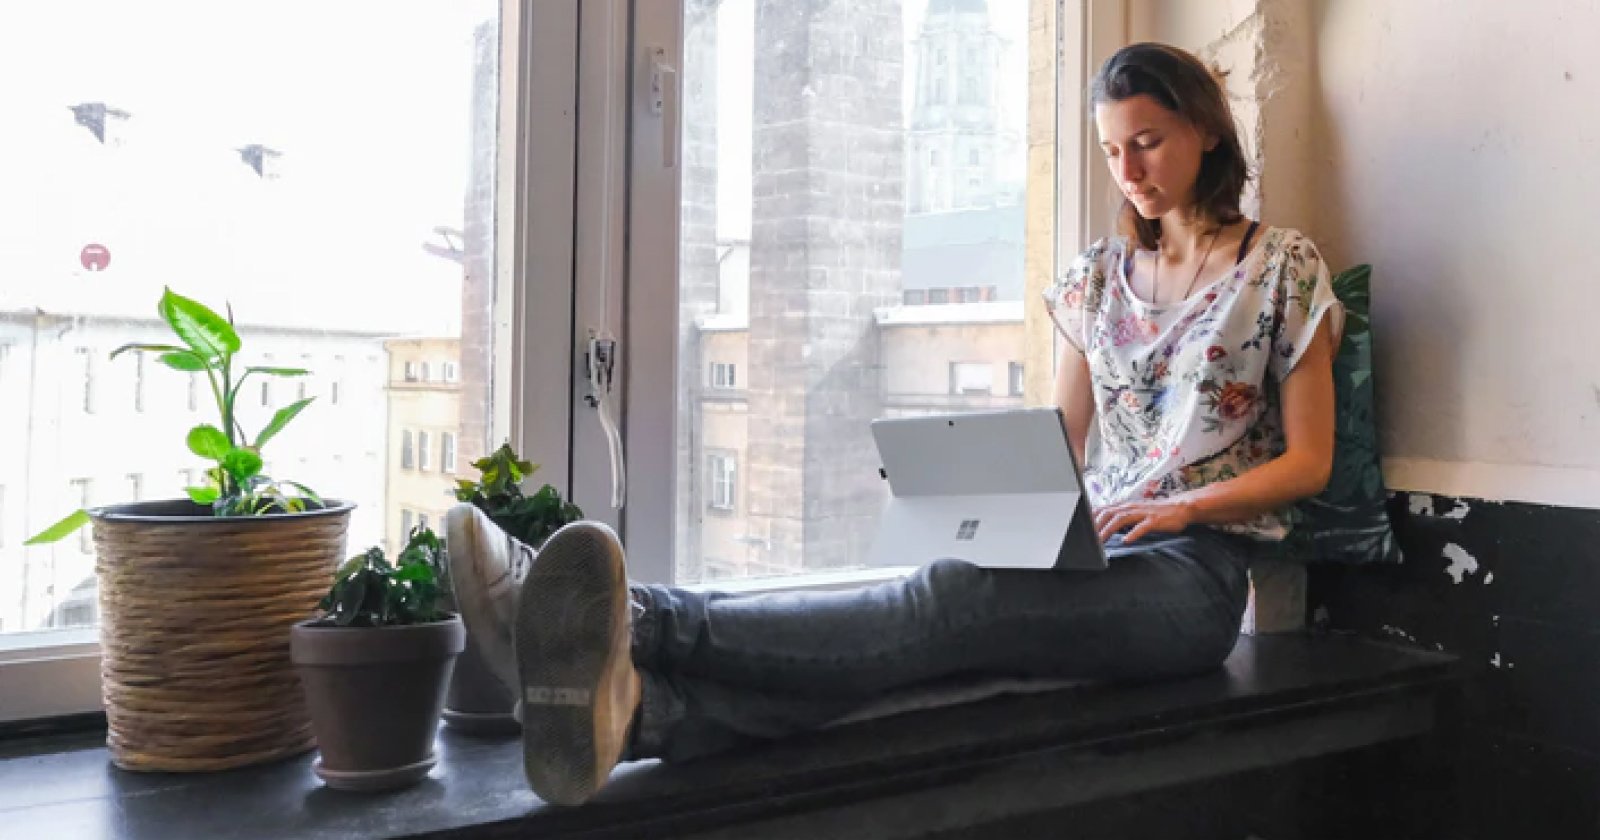  Woman Seated Beside Window on Her Laptop with Three Plants at Her Feet with Cityscape in Background